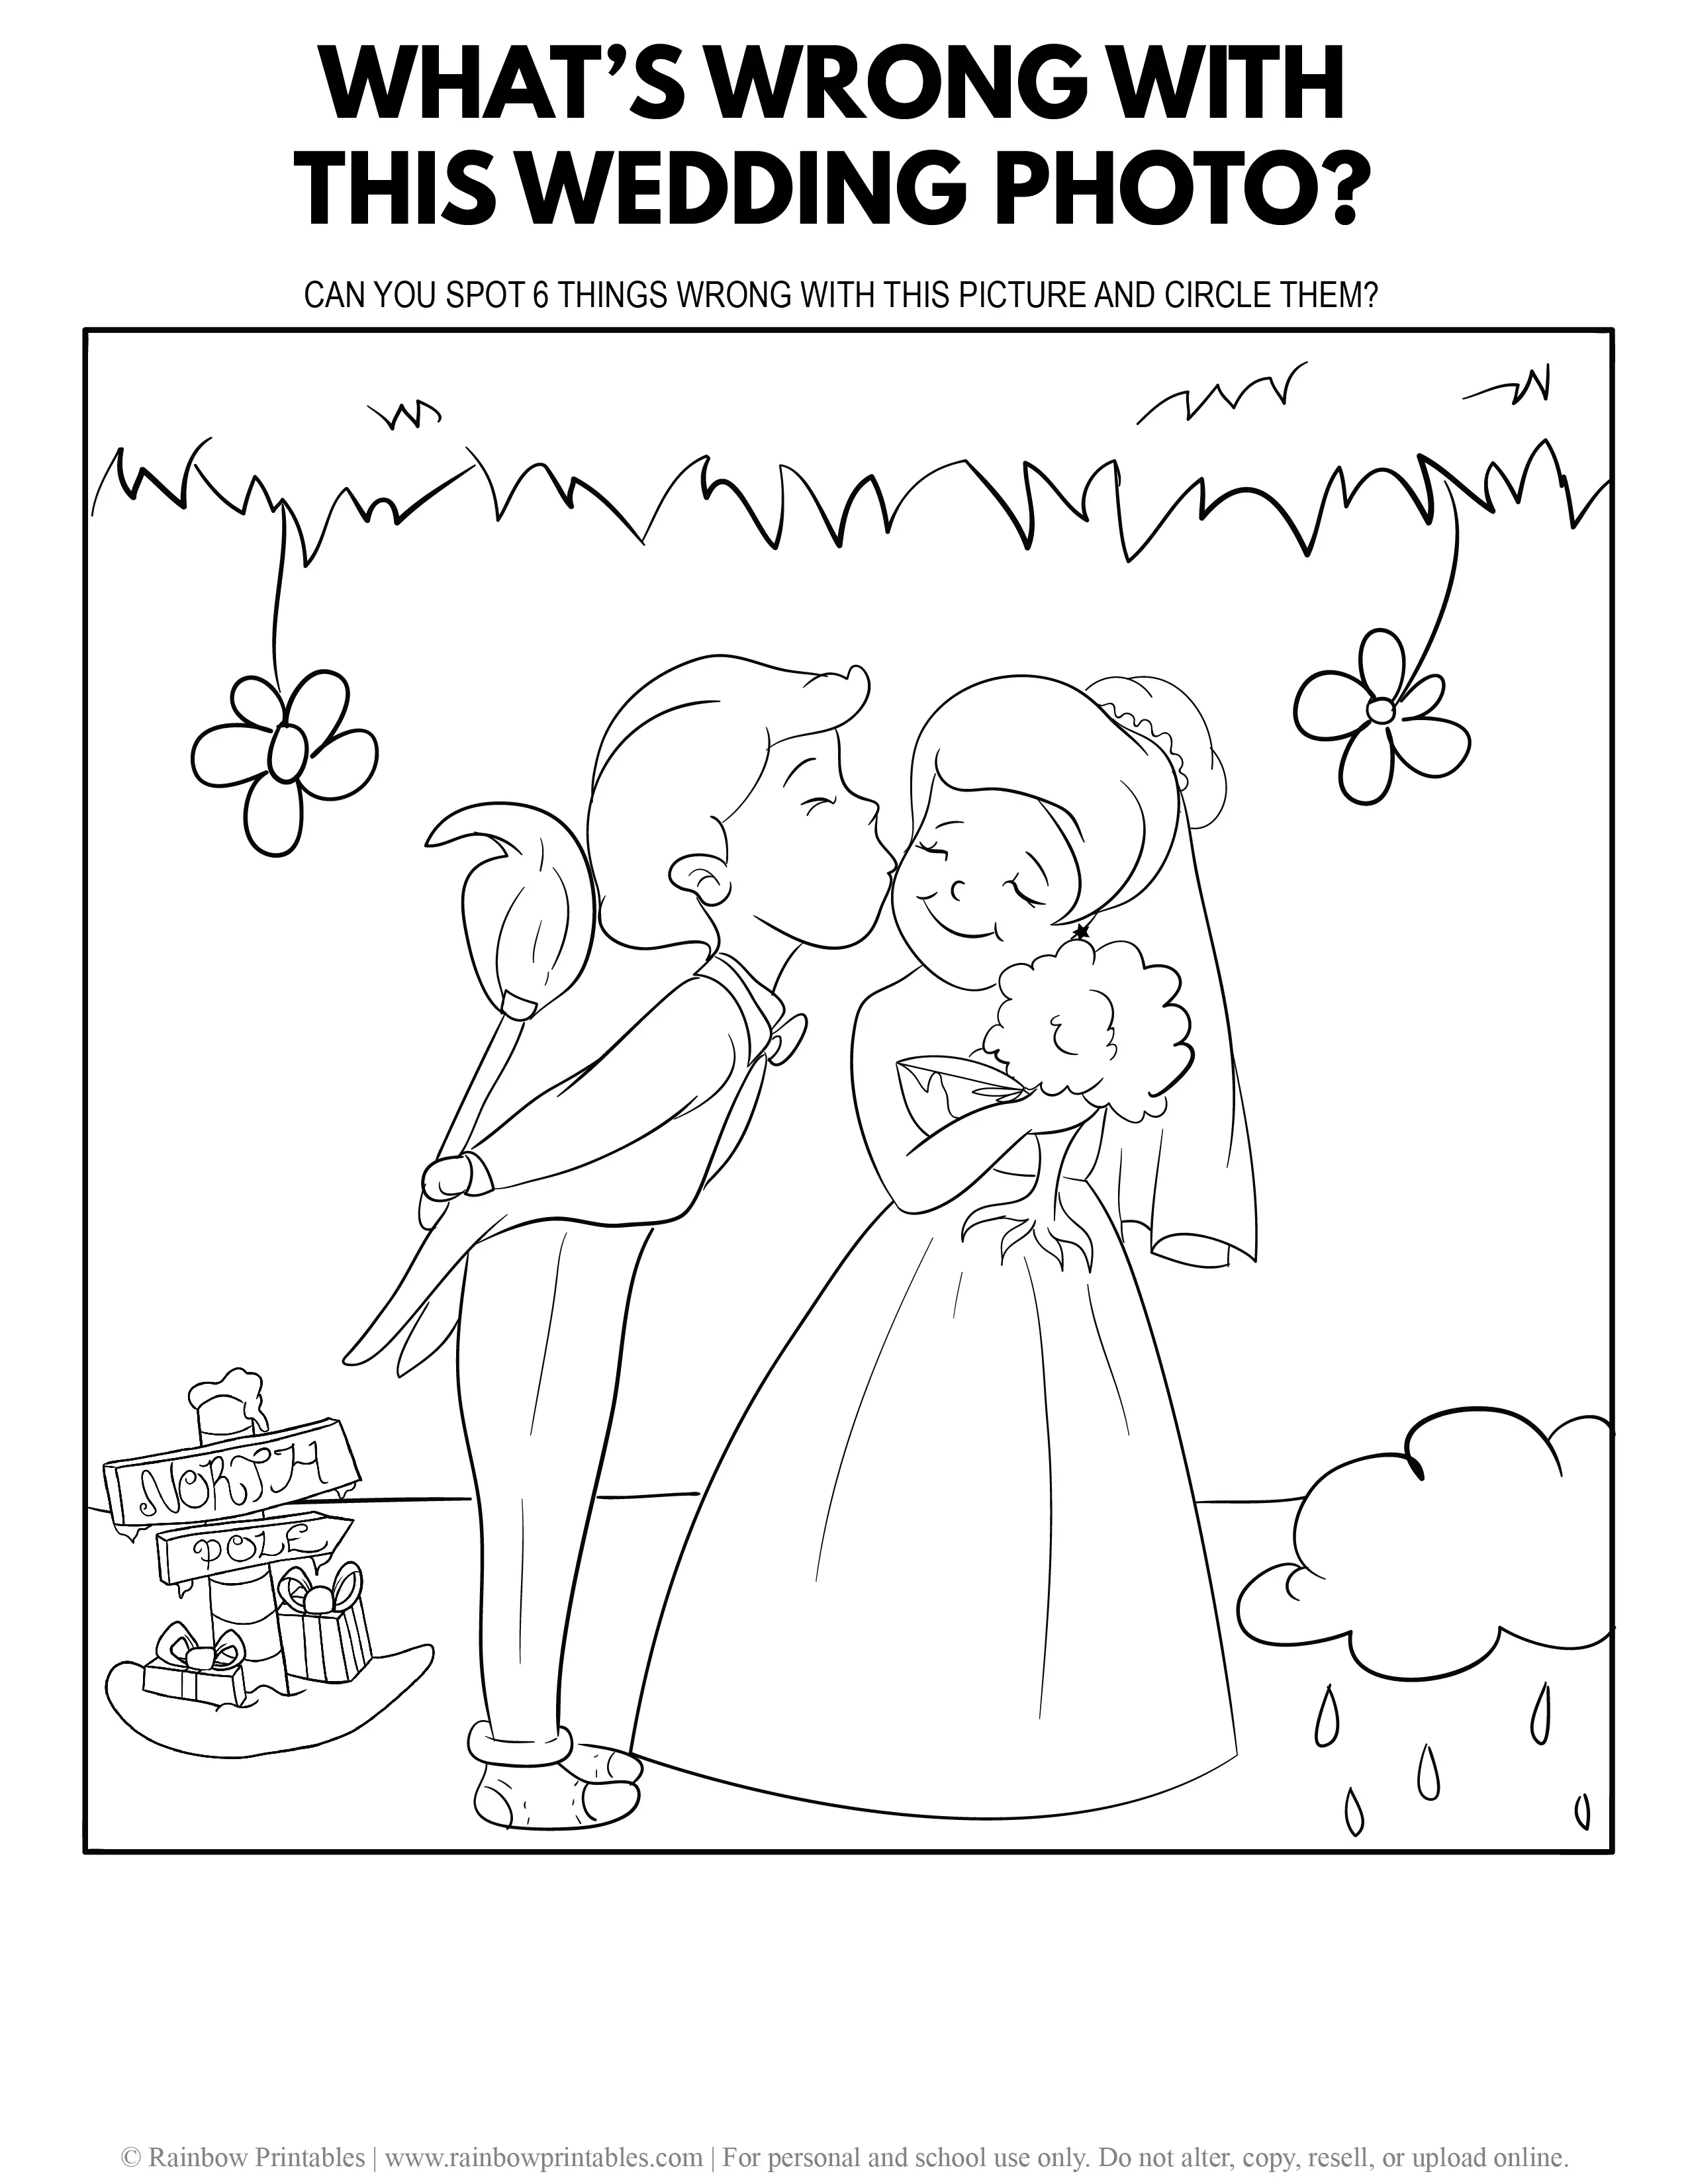 FIND WHATS WRONG WITH WEDDING PHOTO Easy FUN Educational Game Activity for Kids Funny Worksheet Printable PDF JPEG EASY Coloring Sheet ISPY Logic Game